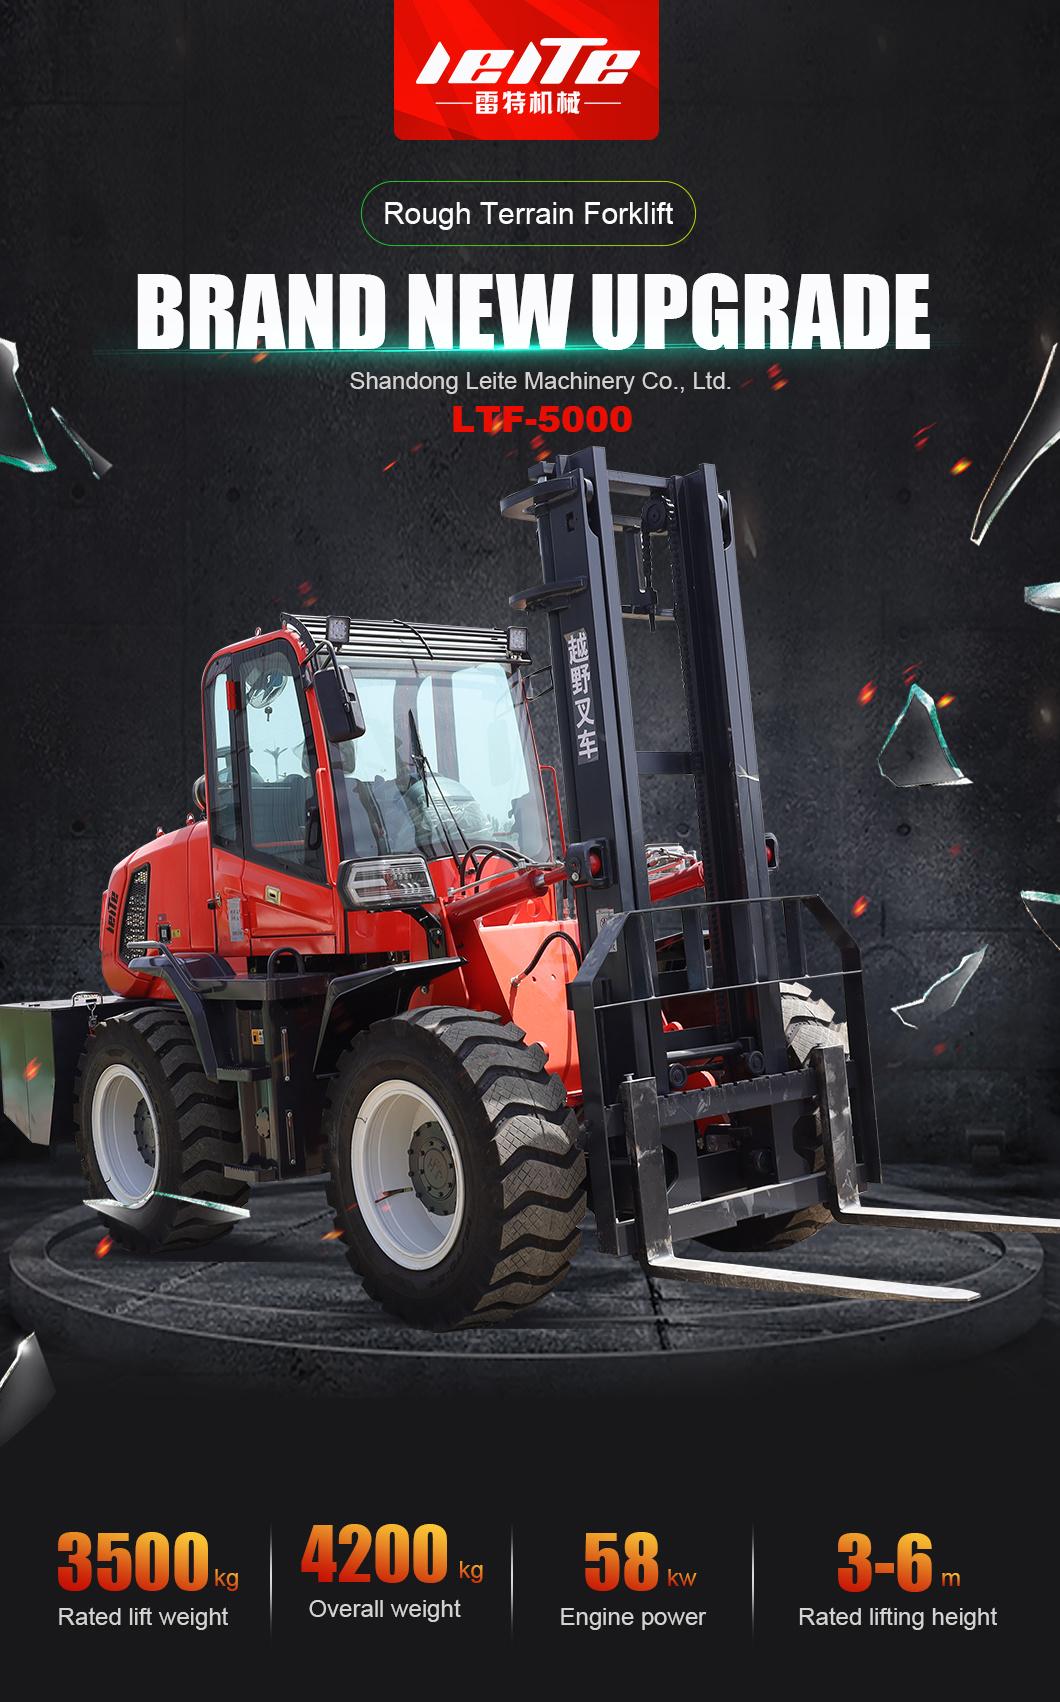 High-Performance off-Road Forklift Suitable for Complex Road Conditions Strong Passability and Low Price